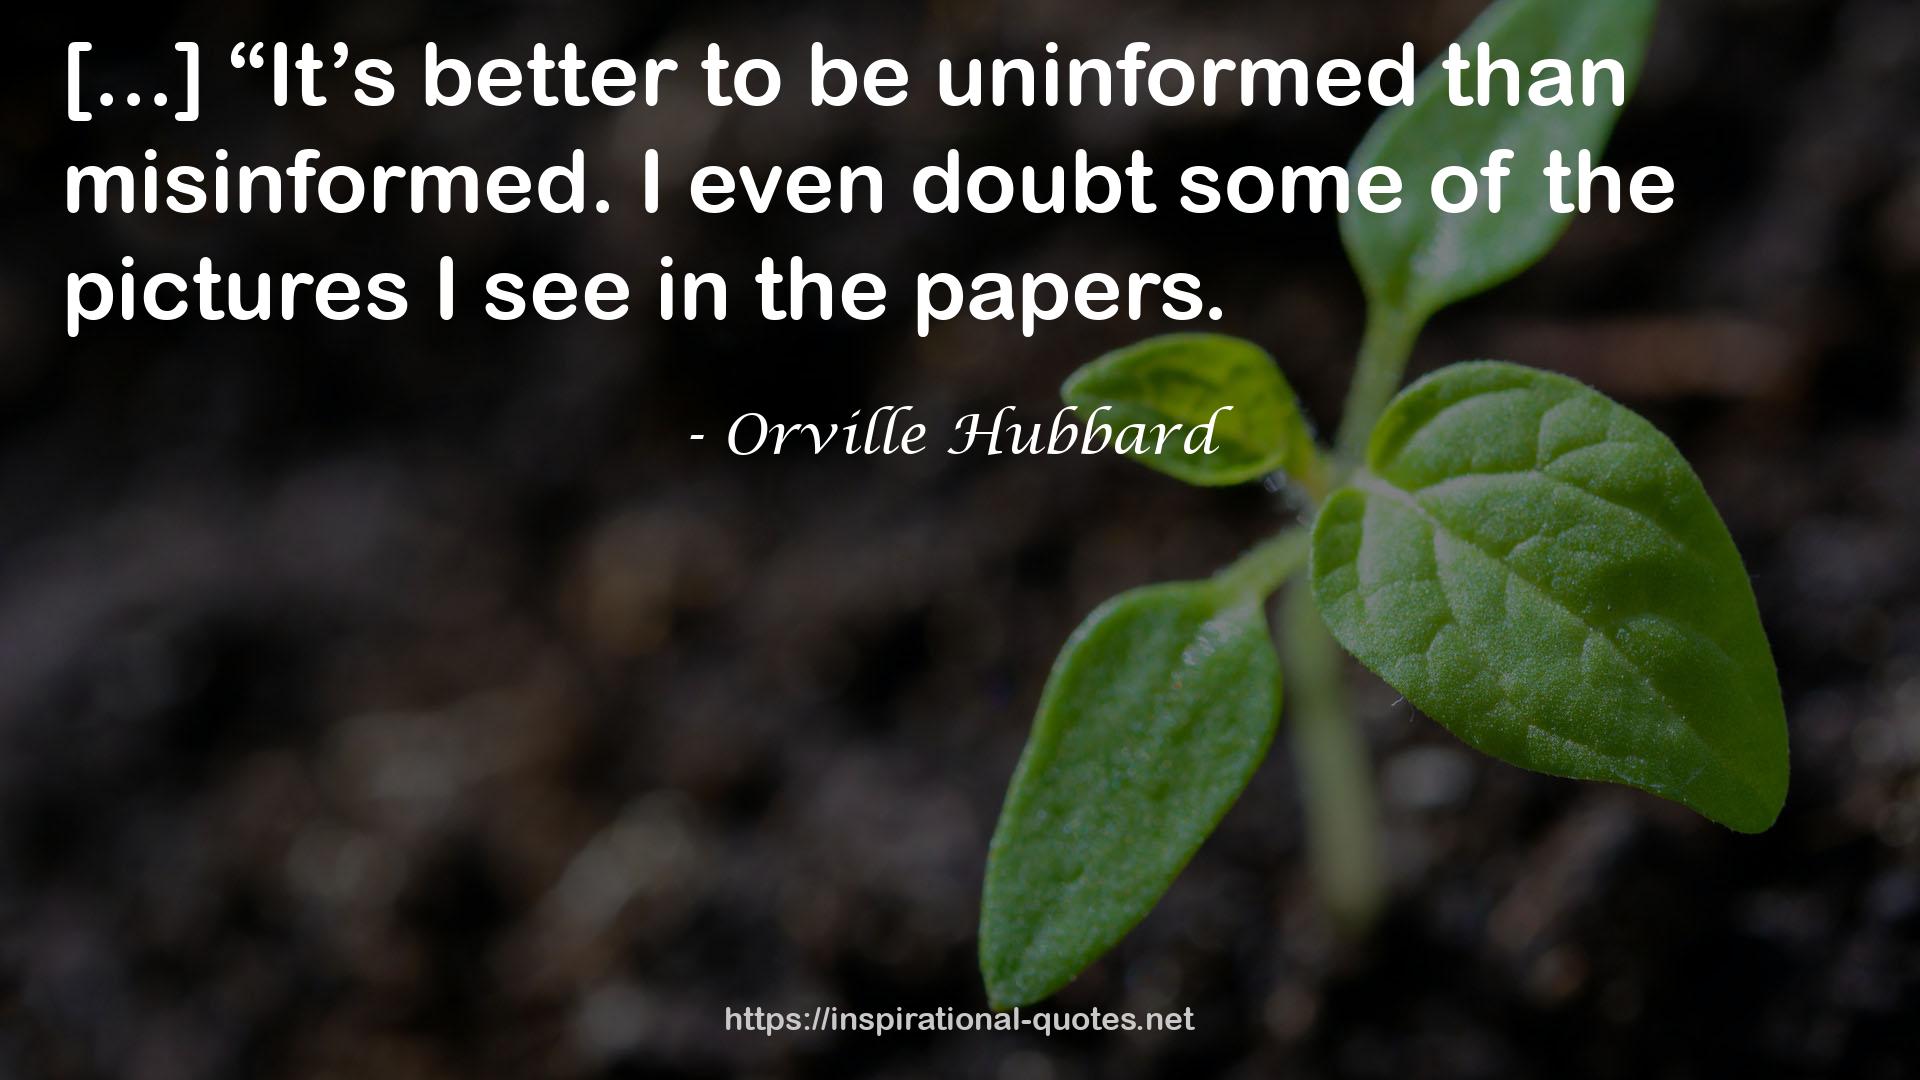 Orville Hubbard QUOTES